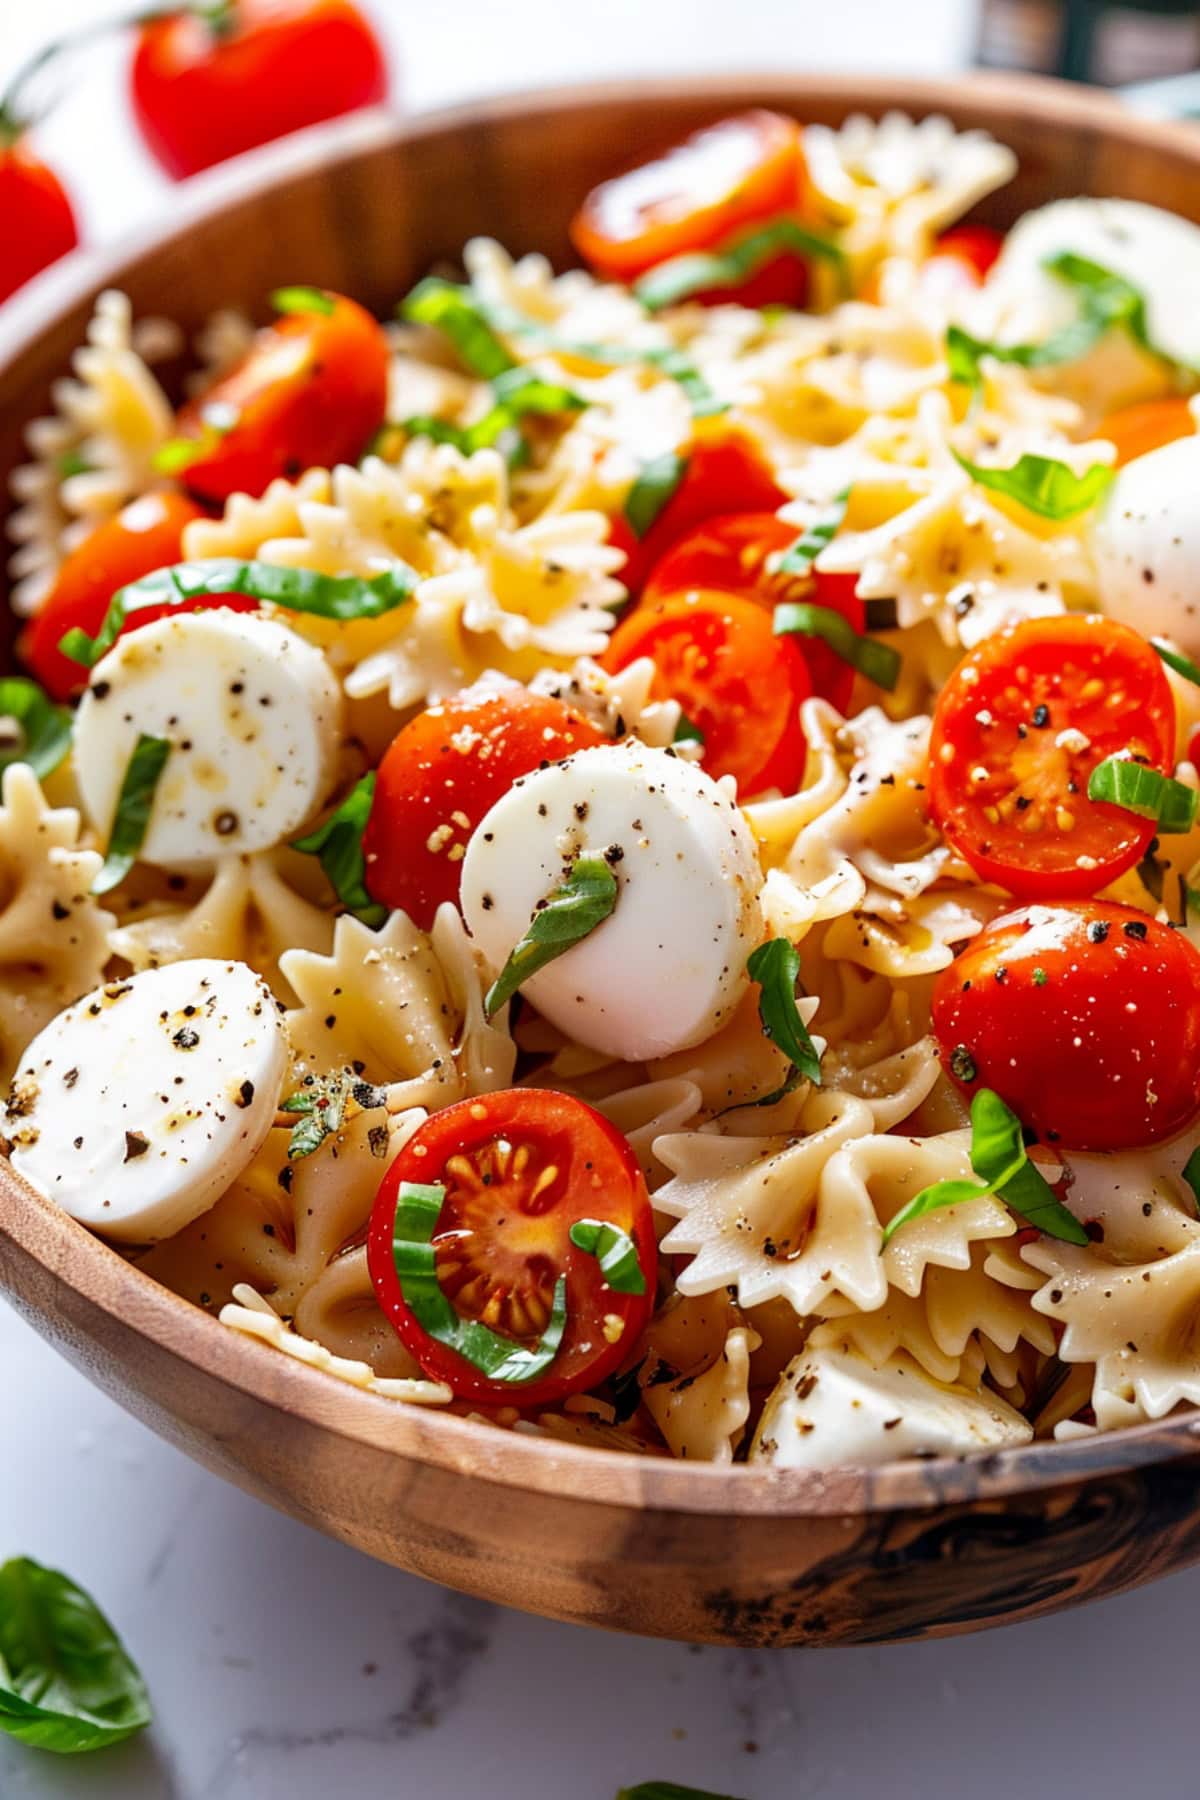 Caprese pasta salad with farfelle pasta, cherry tomatoes, basil and caprese cheese with dressing served on a wooden bowl.